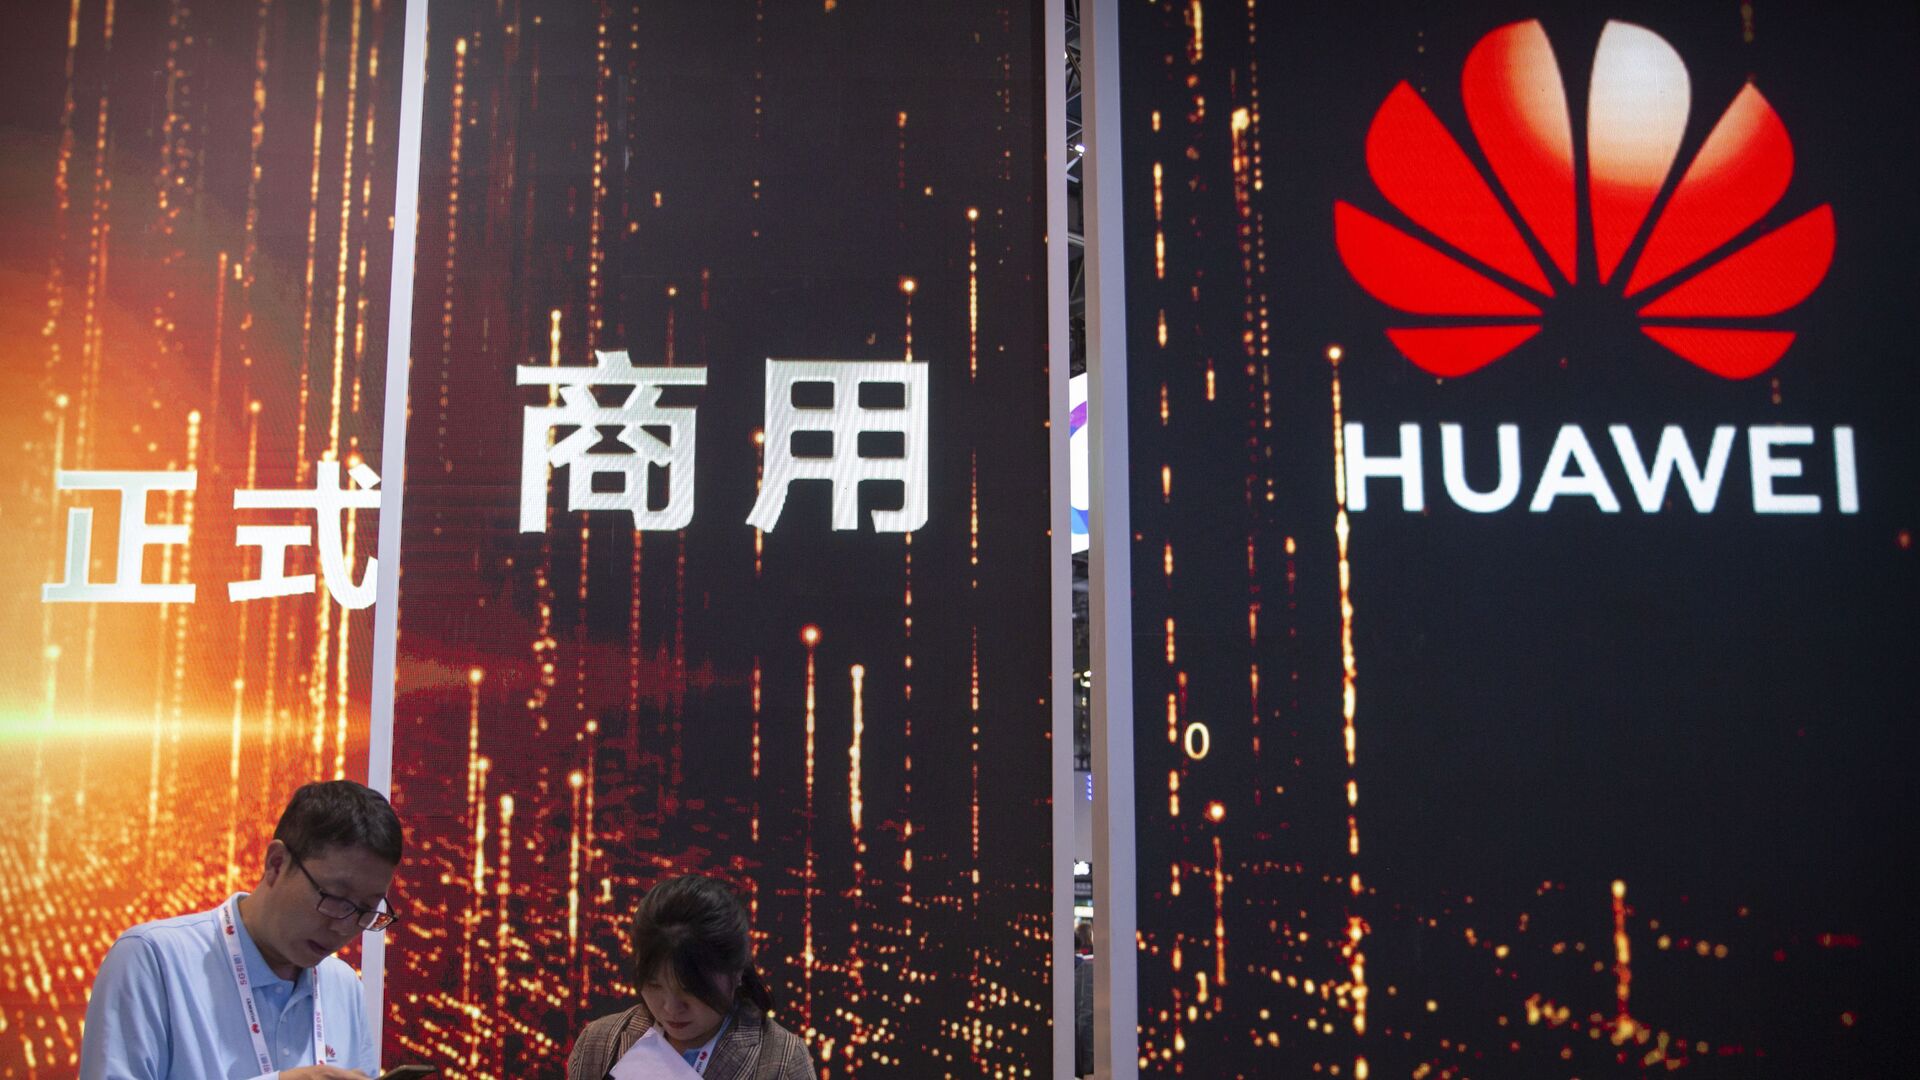 In this Oct. 31, 2019 photo, attendees use their smartphones near a Huawei booth at the PT Expo technology conference in Beijing. Chinese tech giant Huawei is racing to develop replacements for Google apps. U.S. sanctions imposed on security grounds block Huawei from using YouTube and other popular Google core apps. - Sputnik International, 1920, 21.07.2021